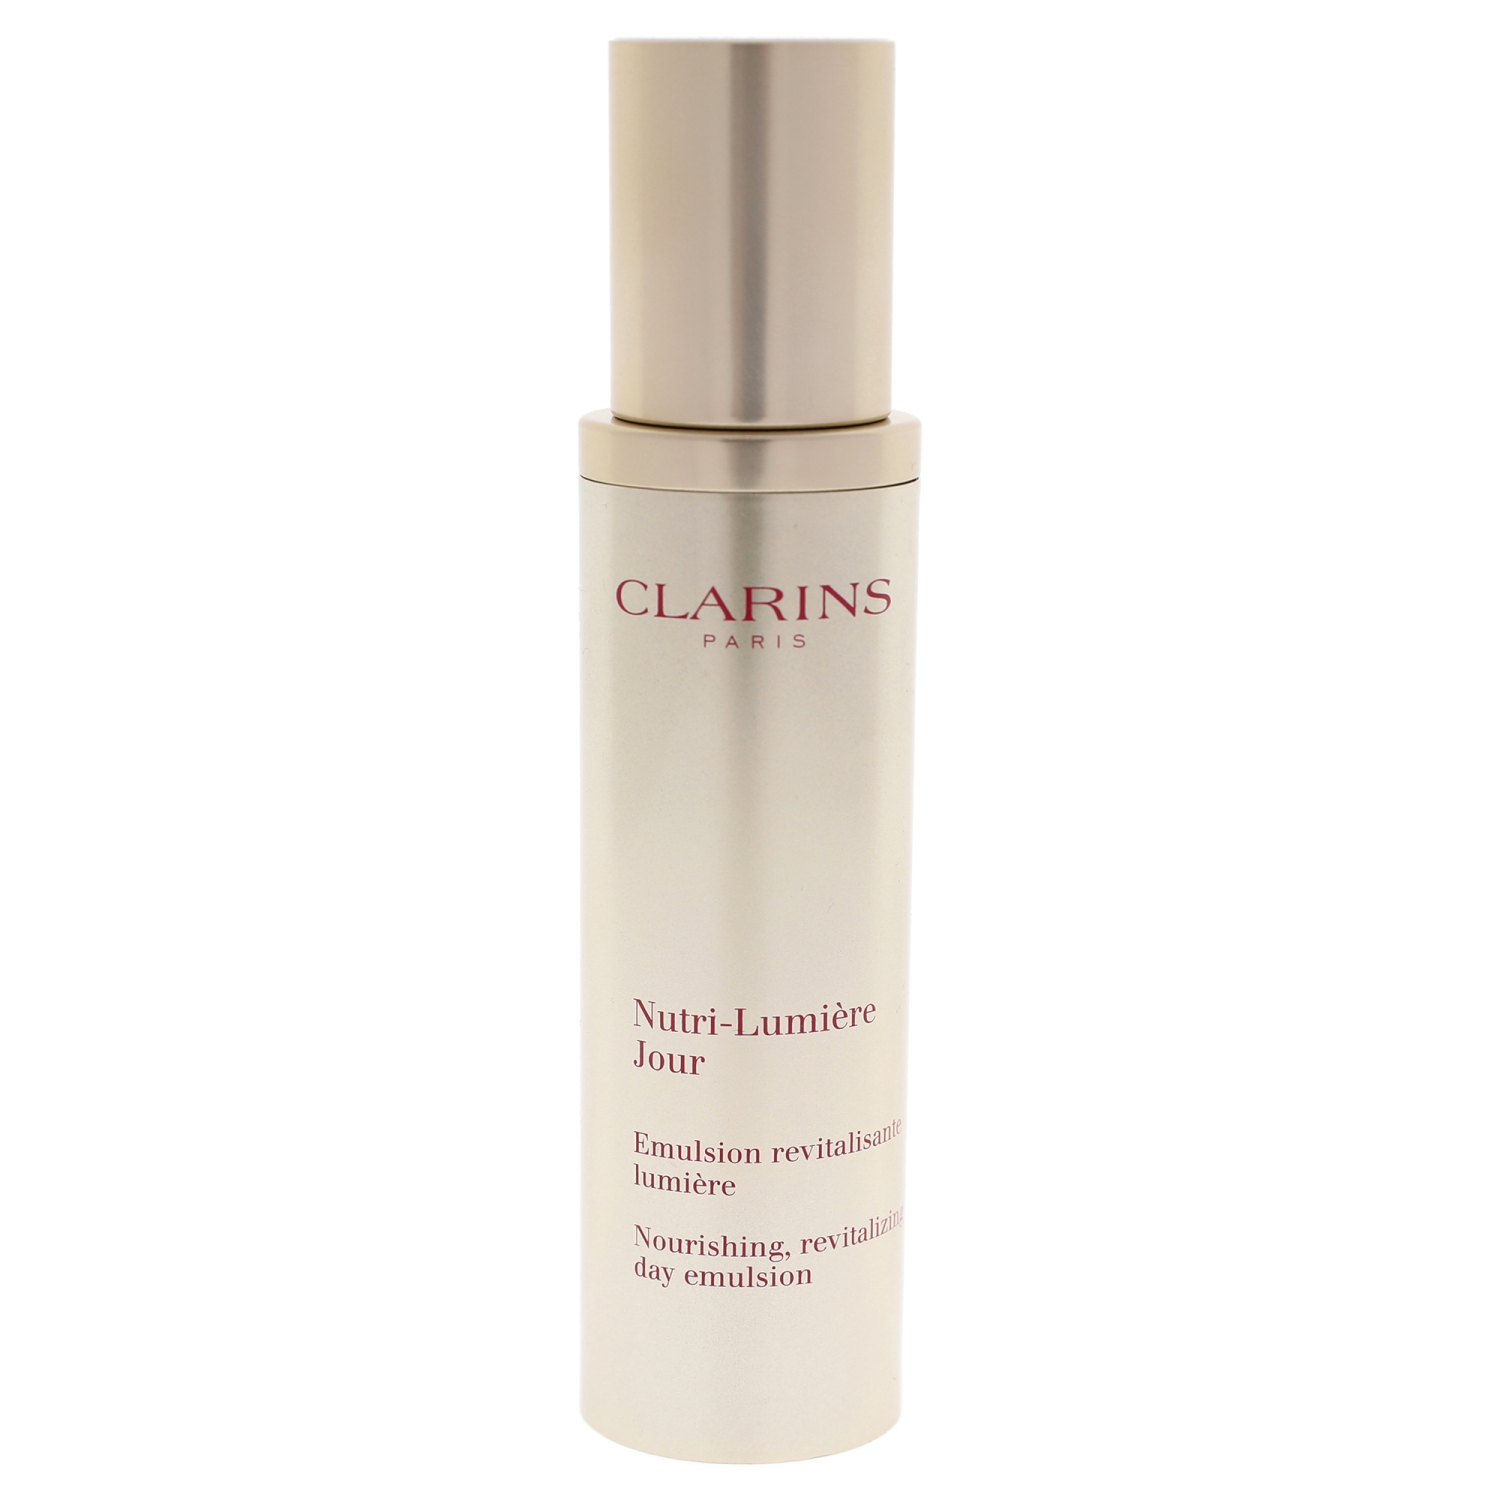 Nutri-Lumiere Day Emulsion by Clarins for Unisex - 1.6 oz Emulsion